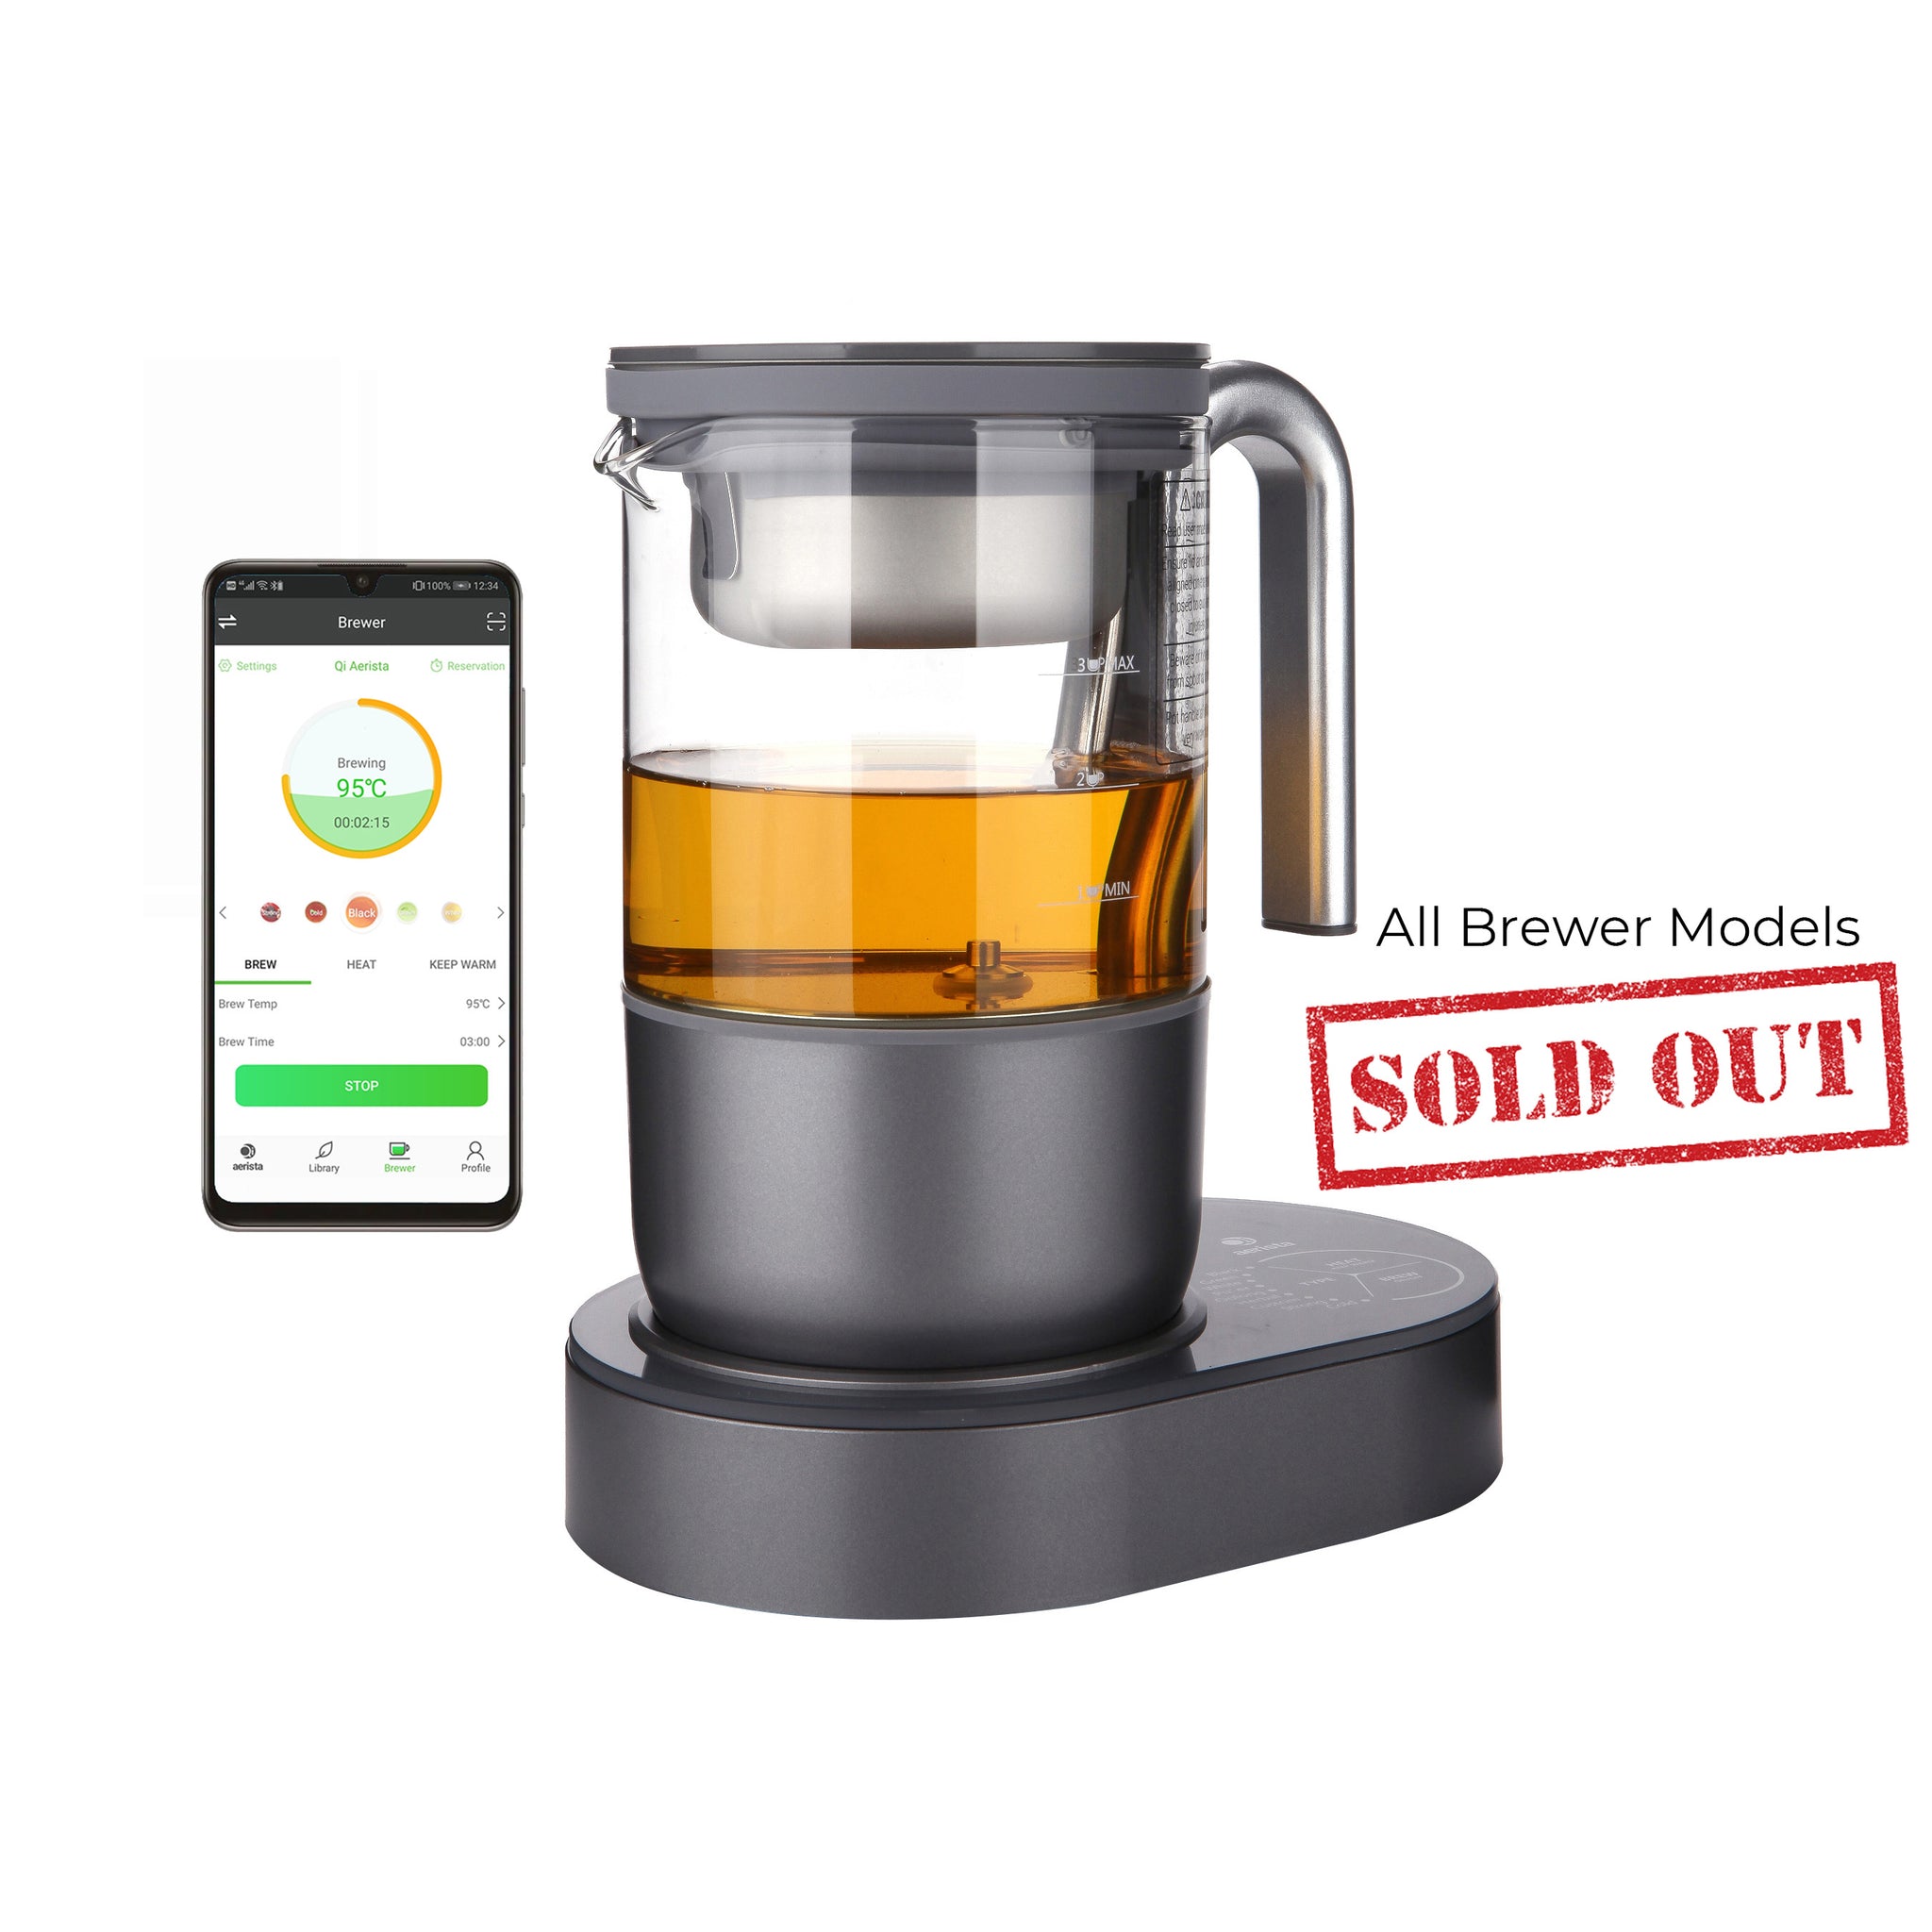 All Qi Aerista Brewer Models Now Completely SOLD OUT!